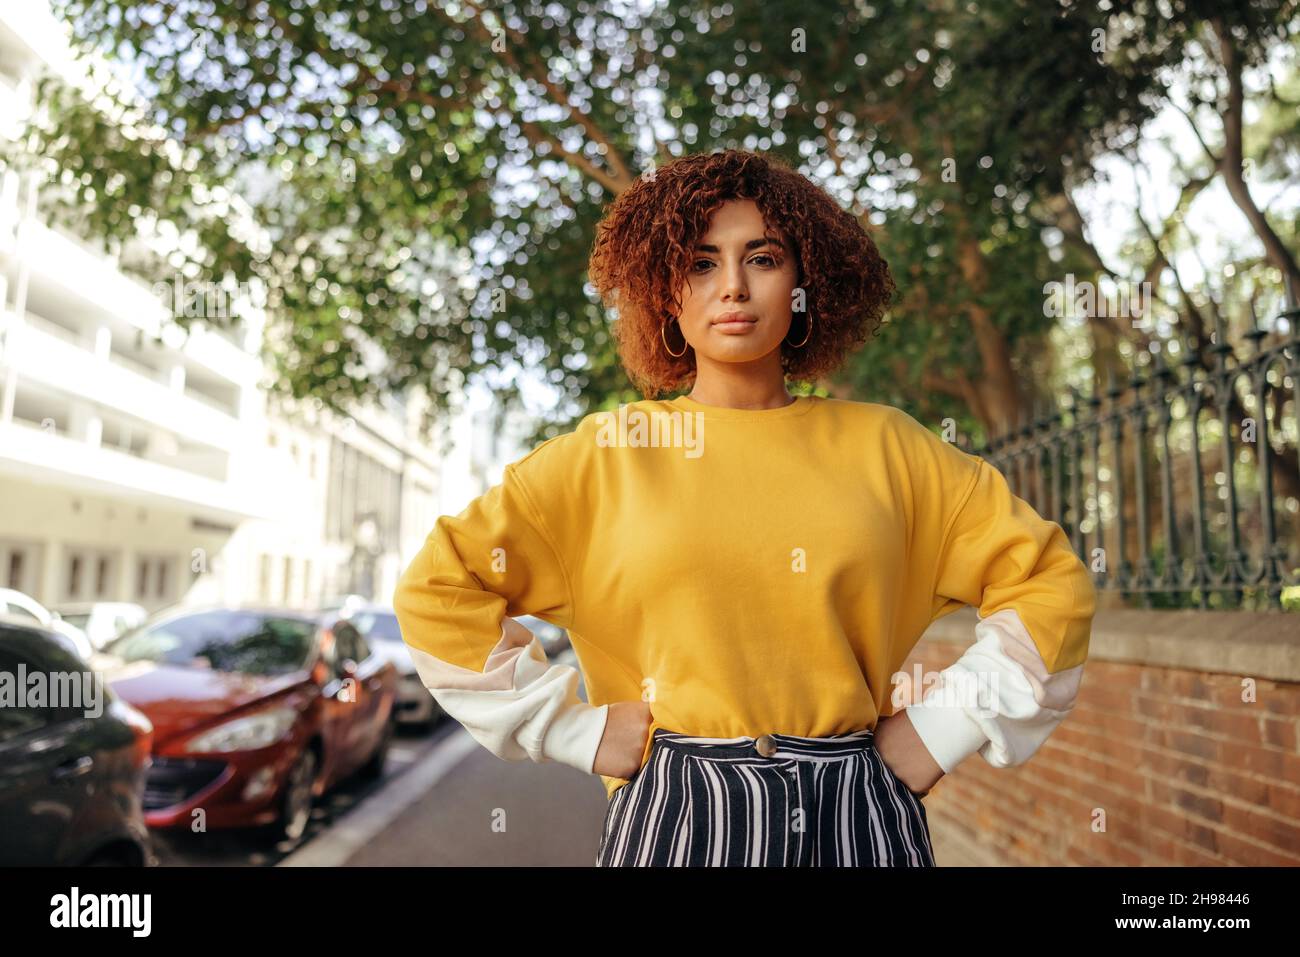 Assertive teenage girl standing on an urban sidewalk with her hands on her hips. Female youngster wearing red hair and a mustard sweatshirt in the cit Stock Photo